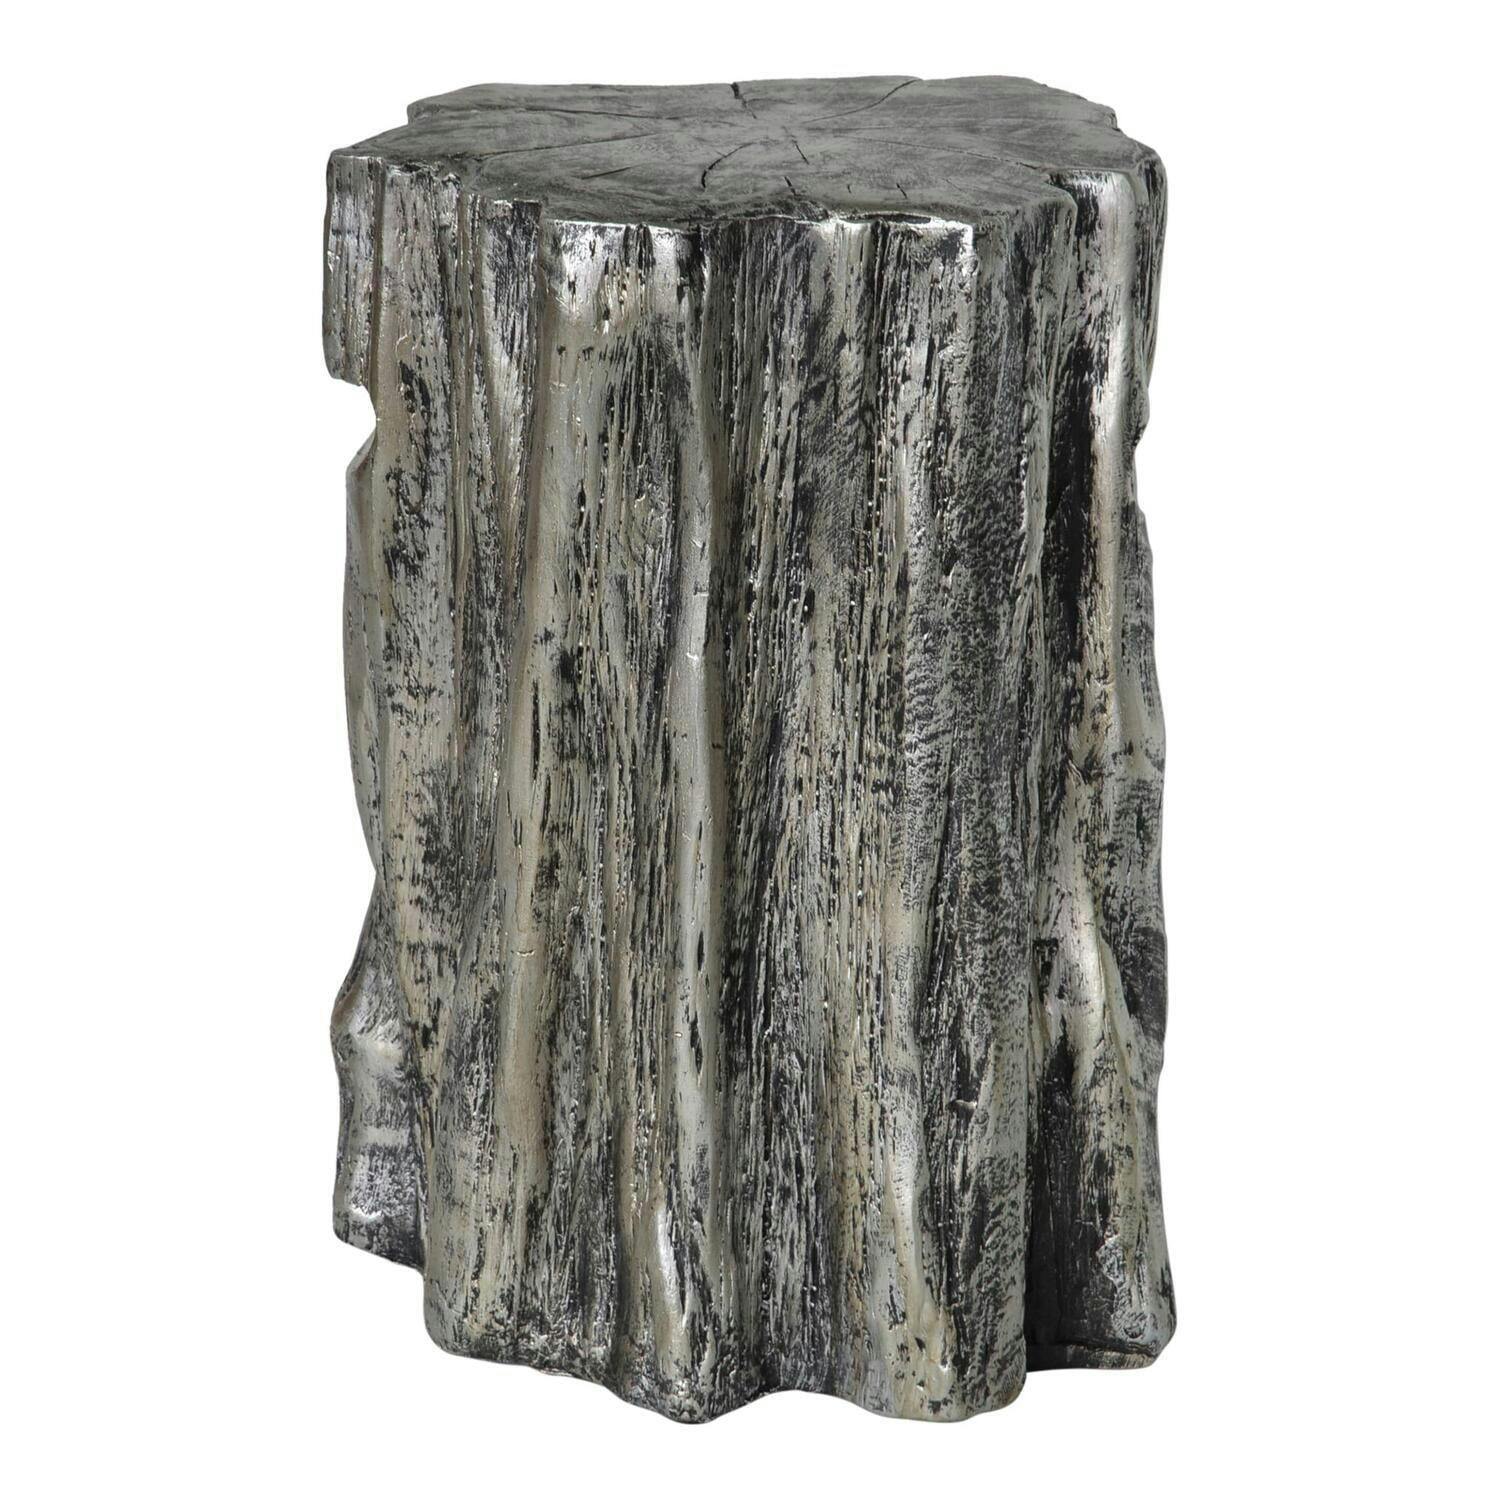 Contemporary Modern Antique-Silver Magnesium Oxide Accent Stool